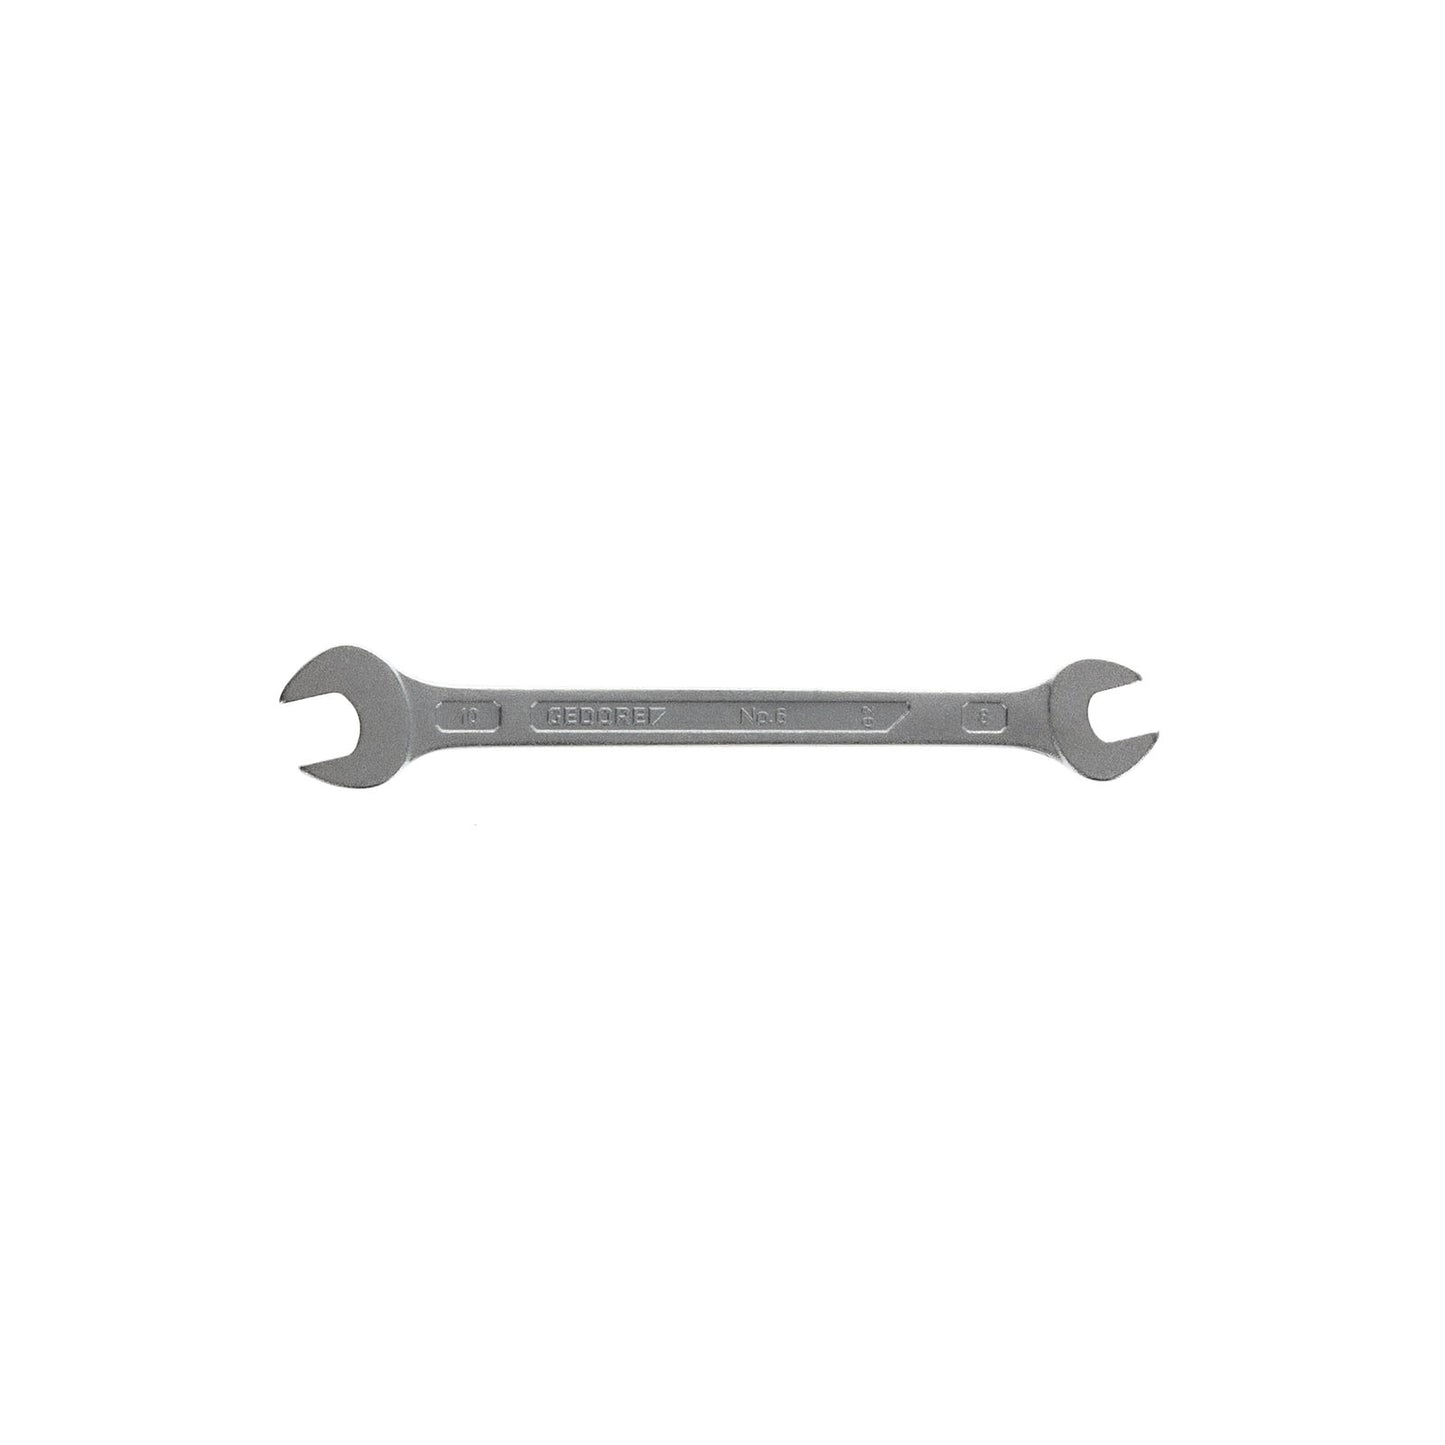 GEDORE 6 8X10 - 2-Mount Fixed Wrench, 8x10 (6064480)